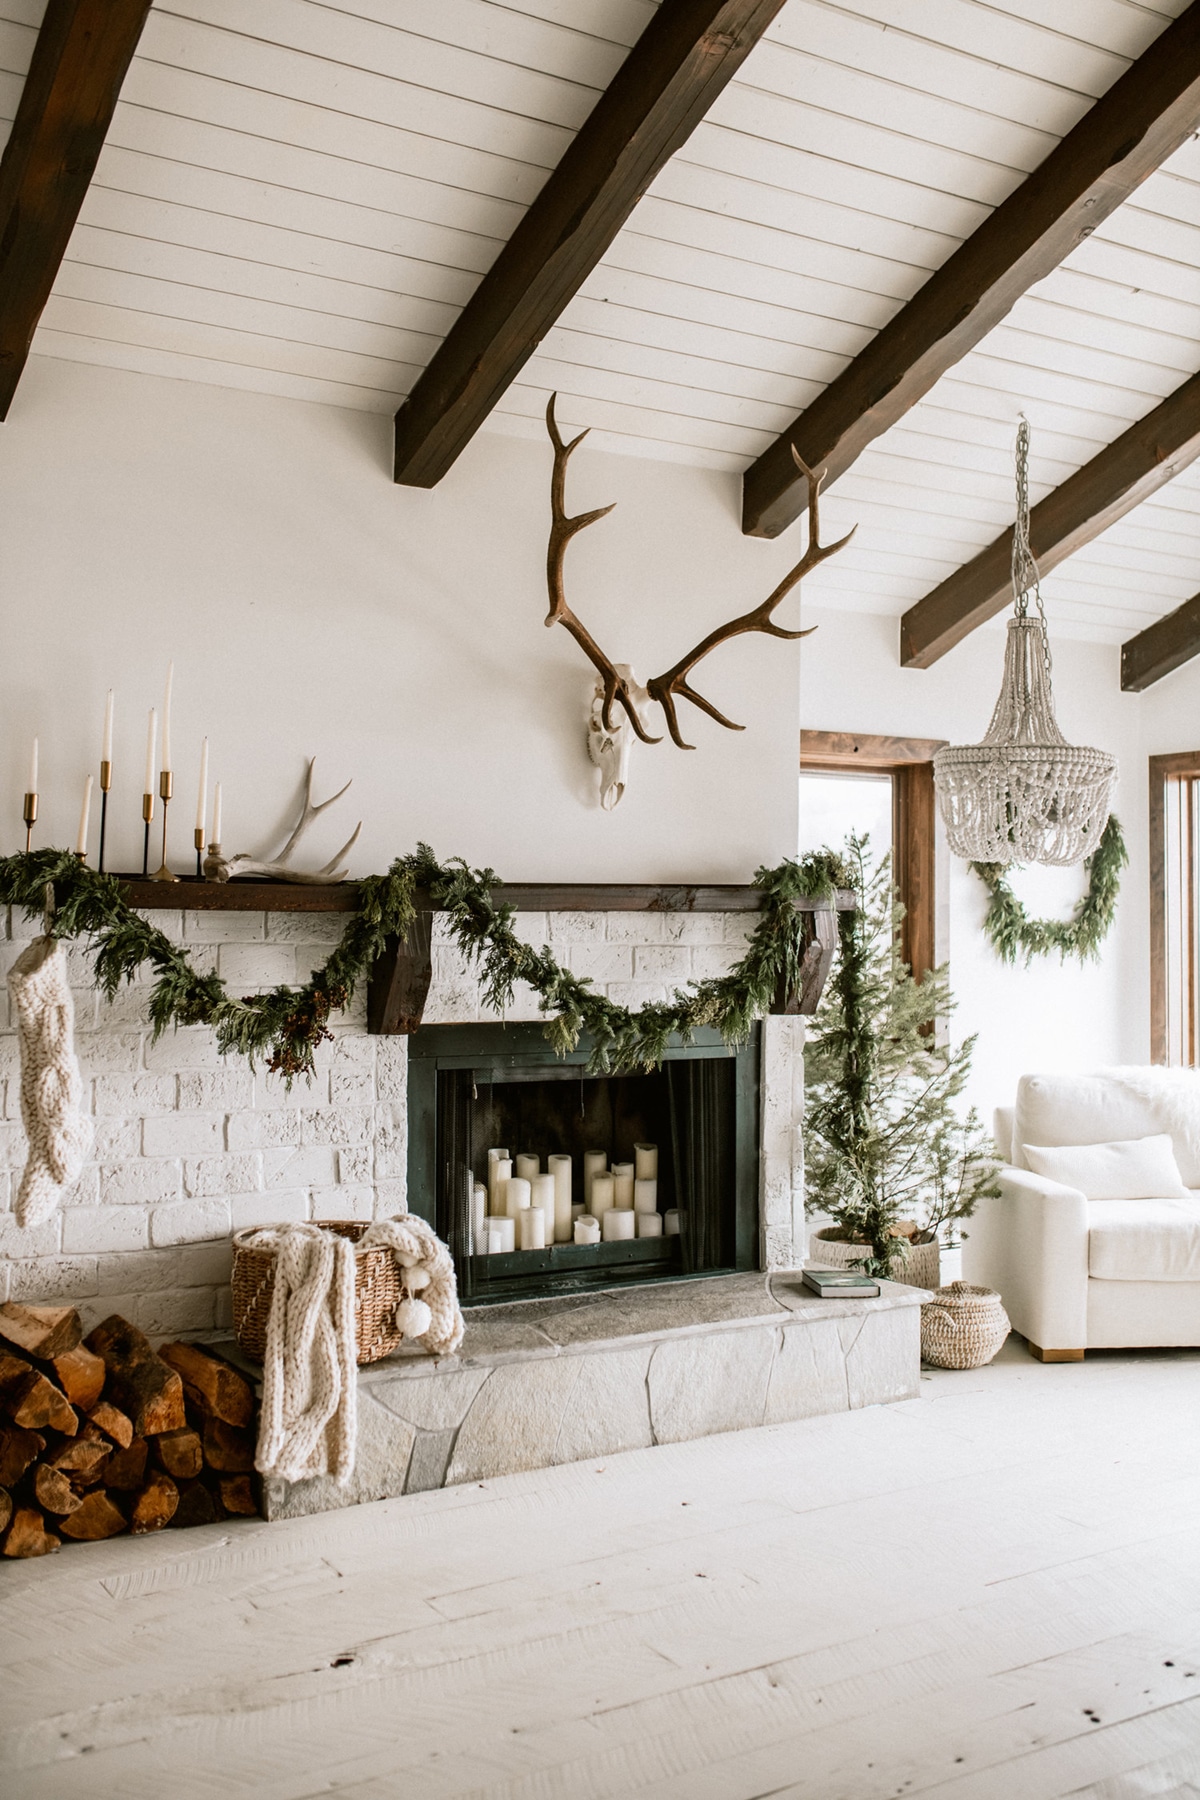 simple minimal holiday decor in a midcentury ranch house by simply suzy | our favorite holiday home decor ideas on coco kelley